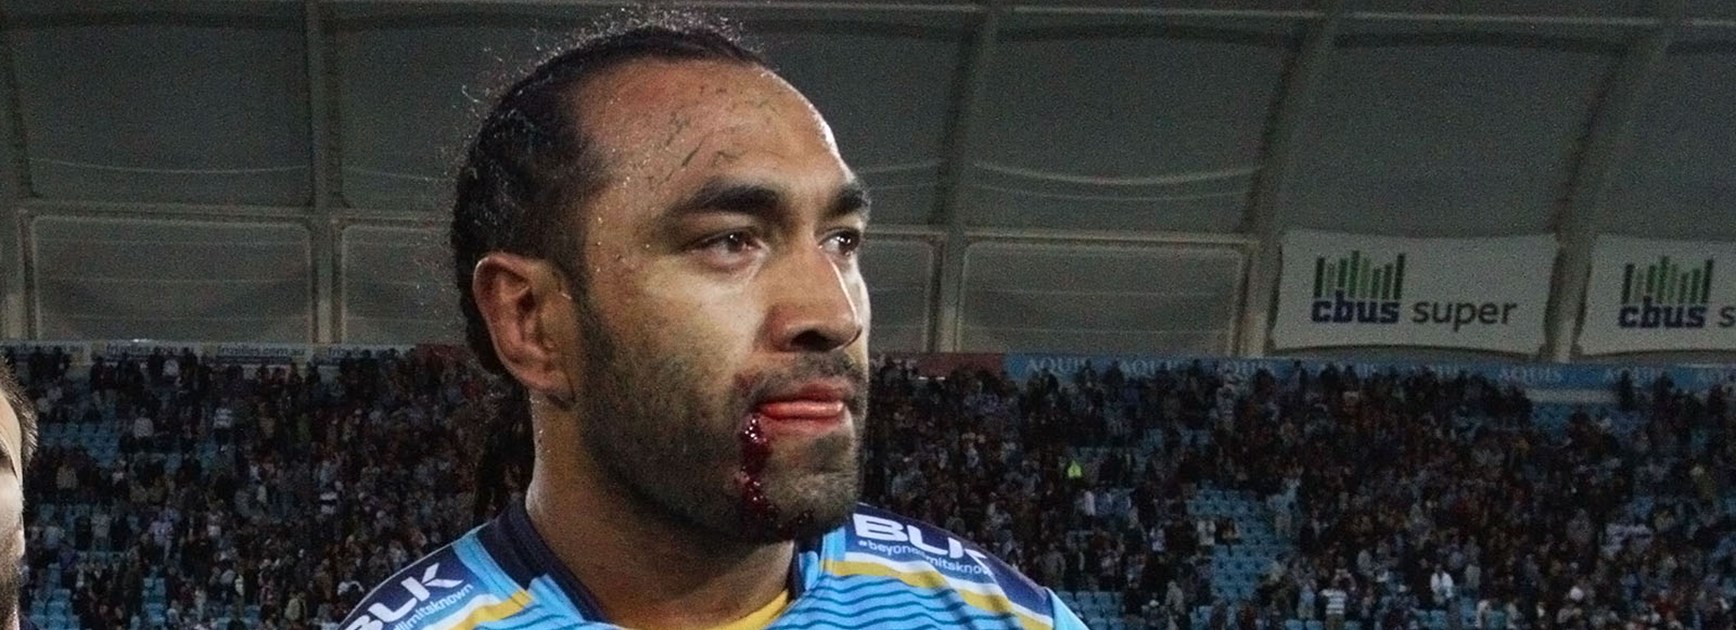 Zeb Taia needed 26 stitches after his last gasp tackle in golden point.